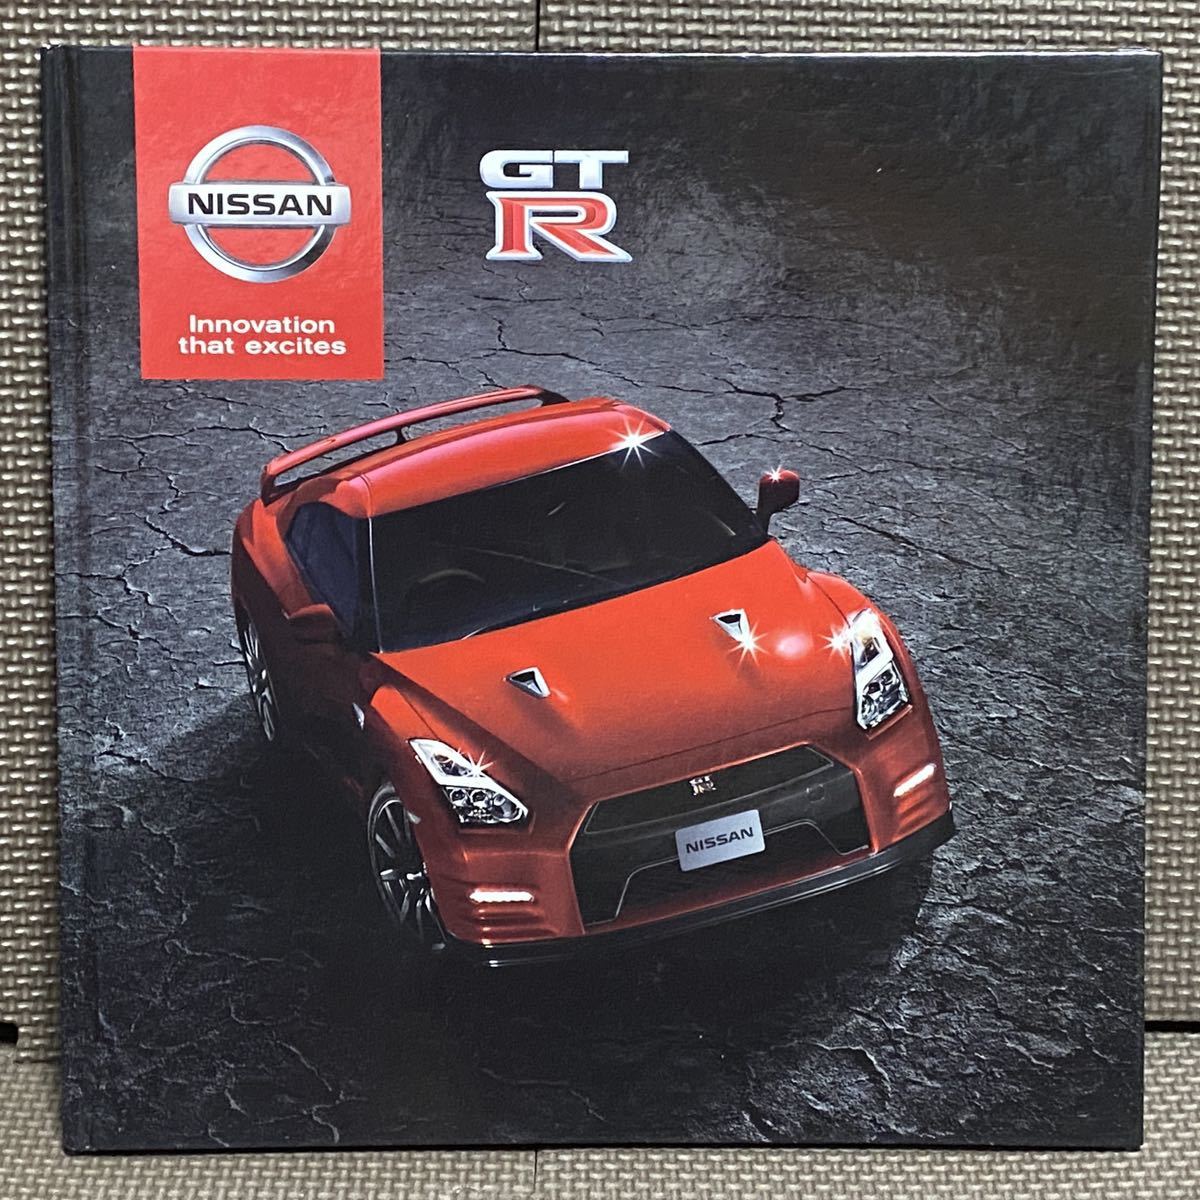  automobile catalog Nissan GT-R R35 2014 year 11 month Heisei era 26 year accessory catalog with price list . Nissan NISSAN GTR accessory option R